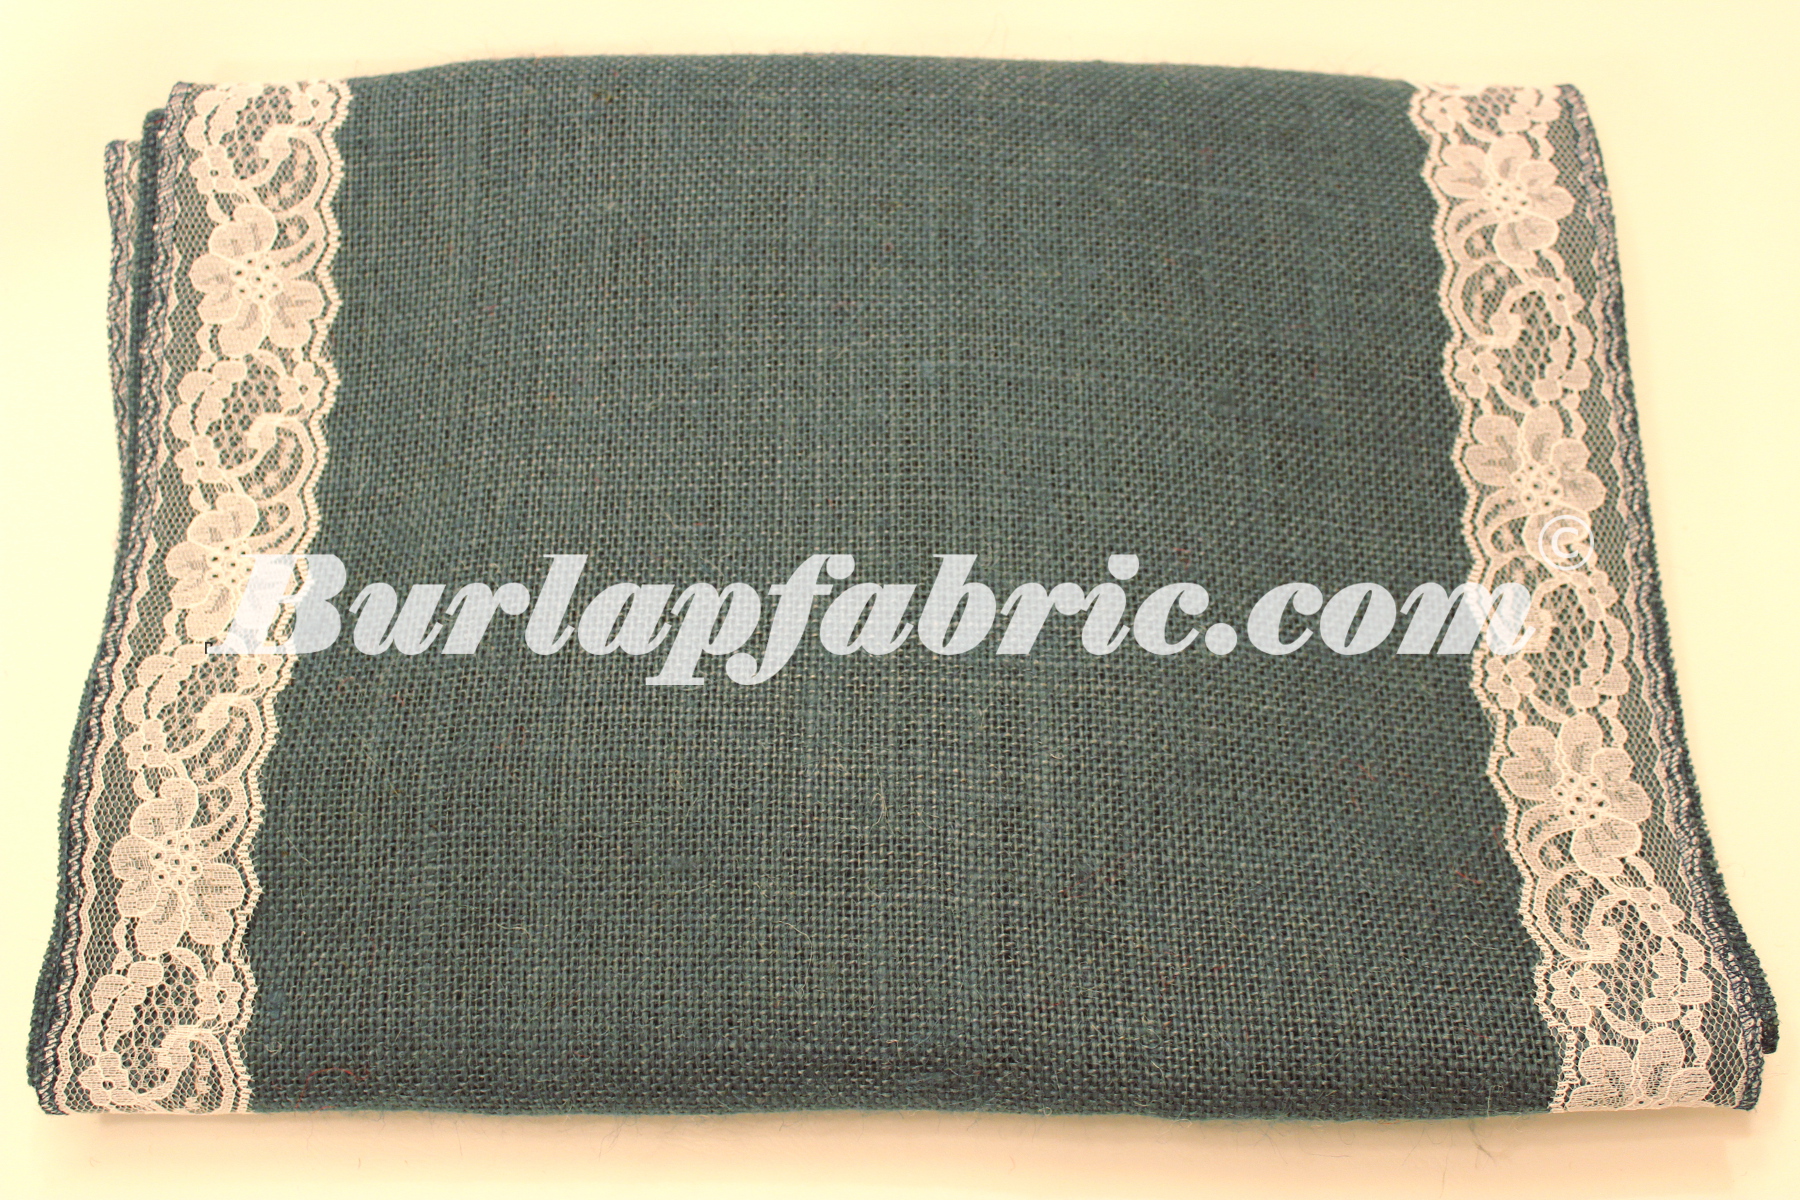 14" Navy Blue Burlap Runner with 2" White Lace Borders